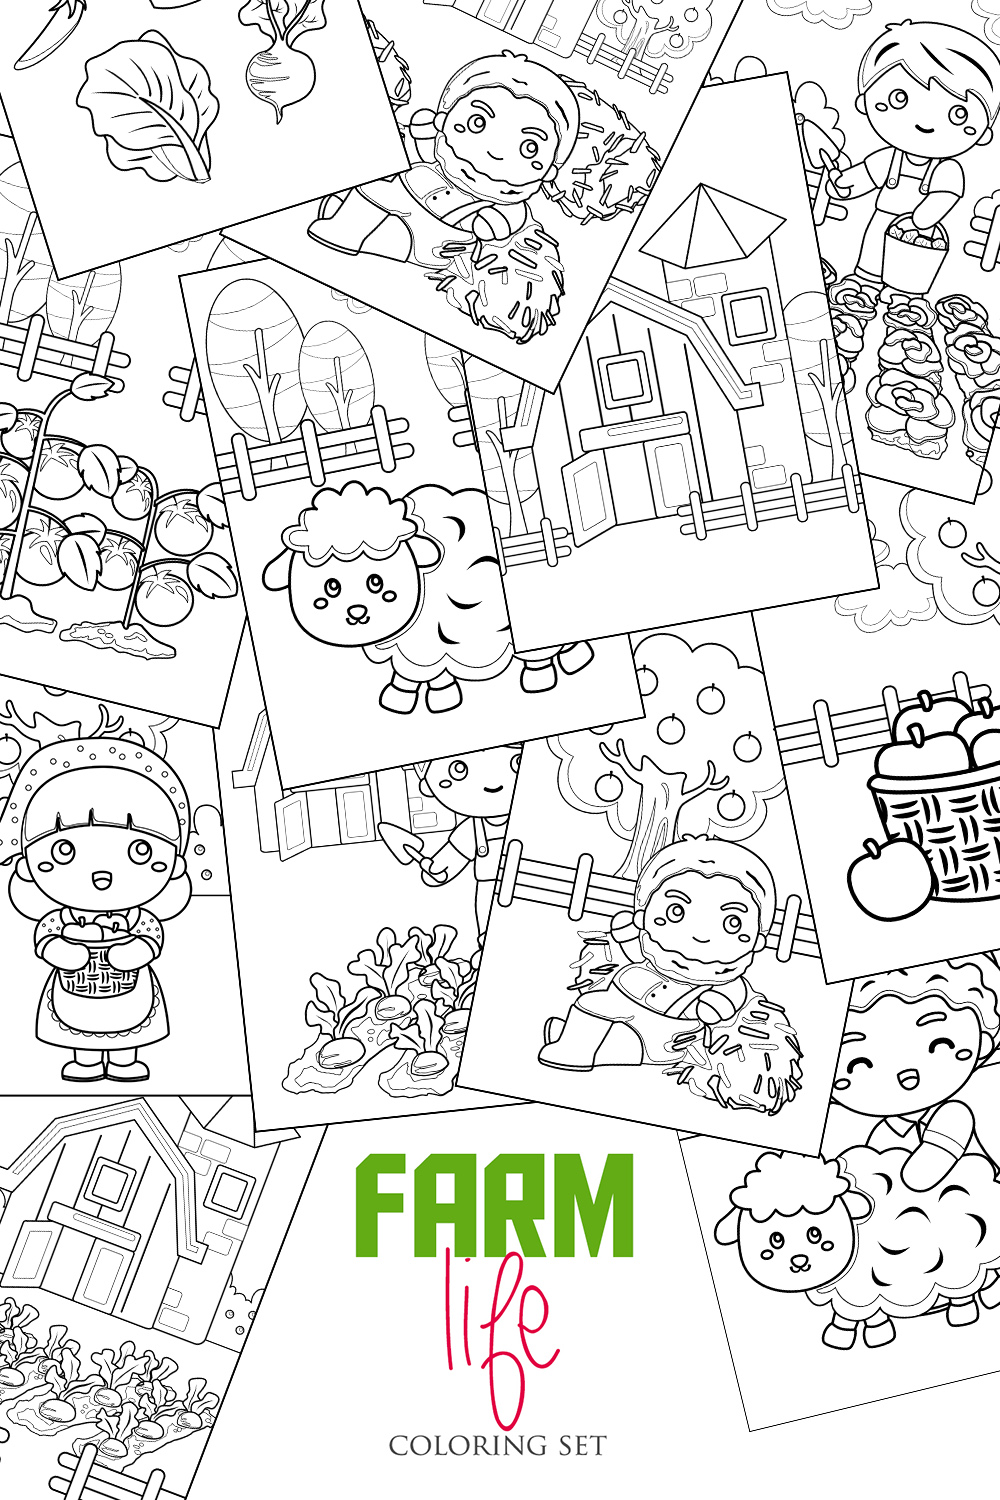 Fun Farm Life Activity with Kids Farmer Family and Animals Coloring Pages Set pinterest preview image.